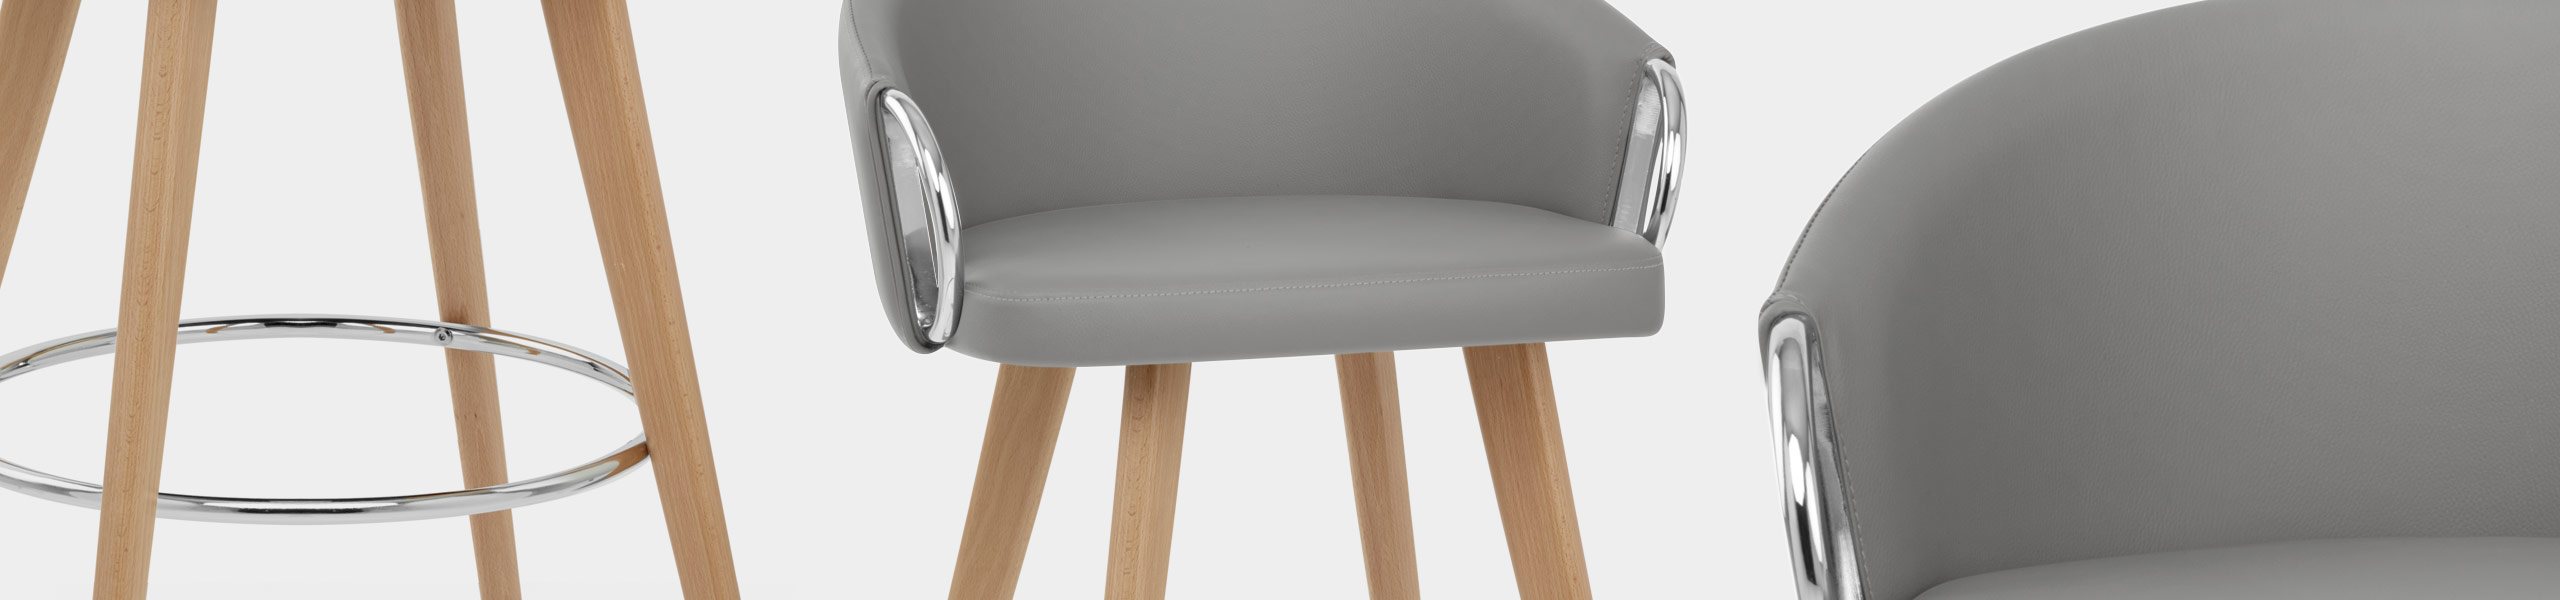 Neo Wooden Stool Grey Leather Video Banner